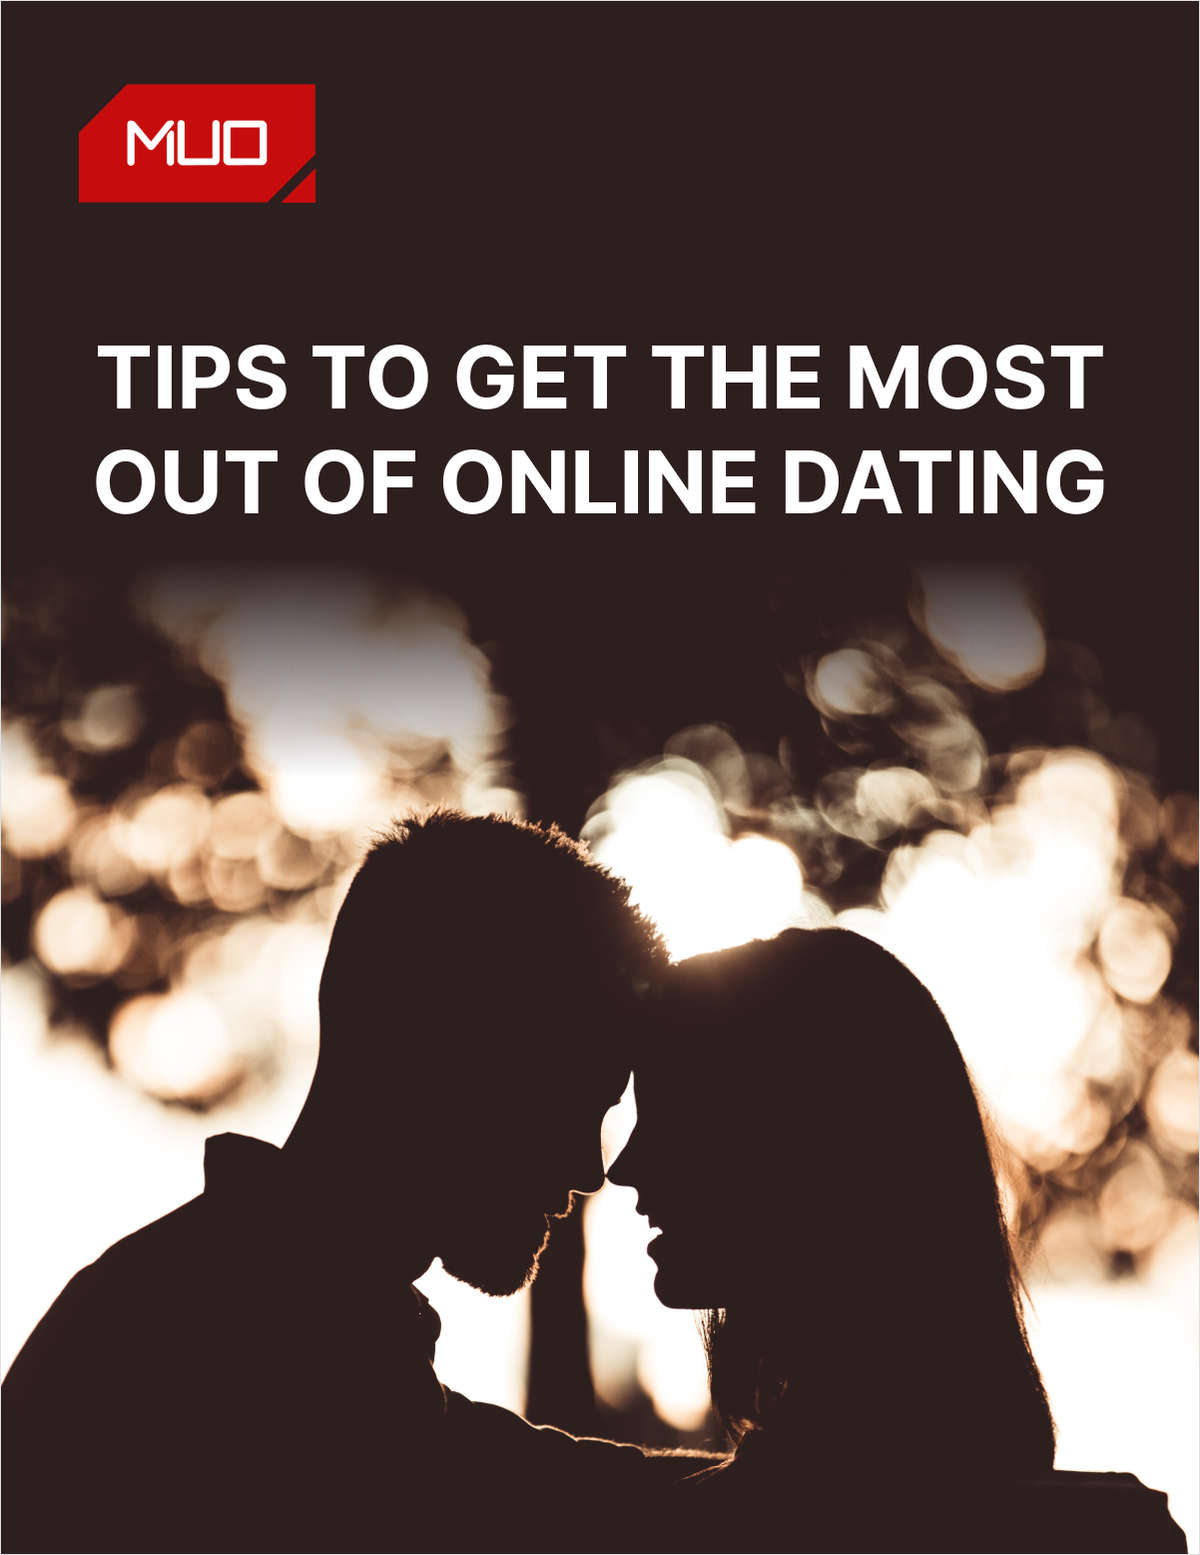 50+ Tips to Get the Most Out of Online Dating